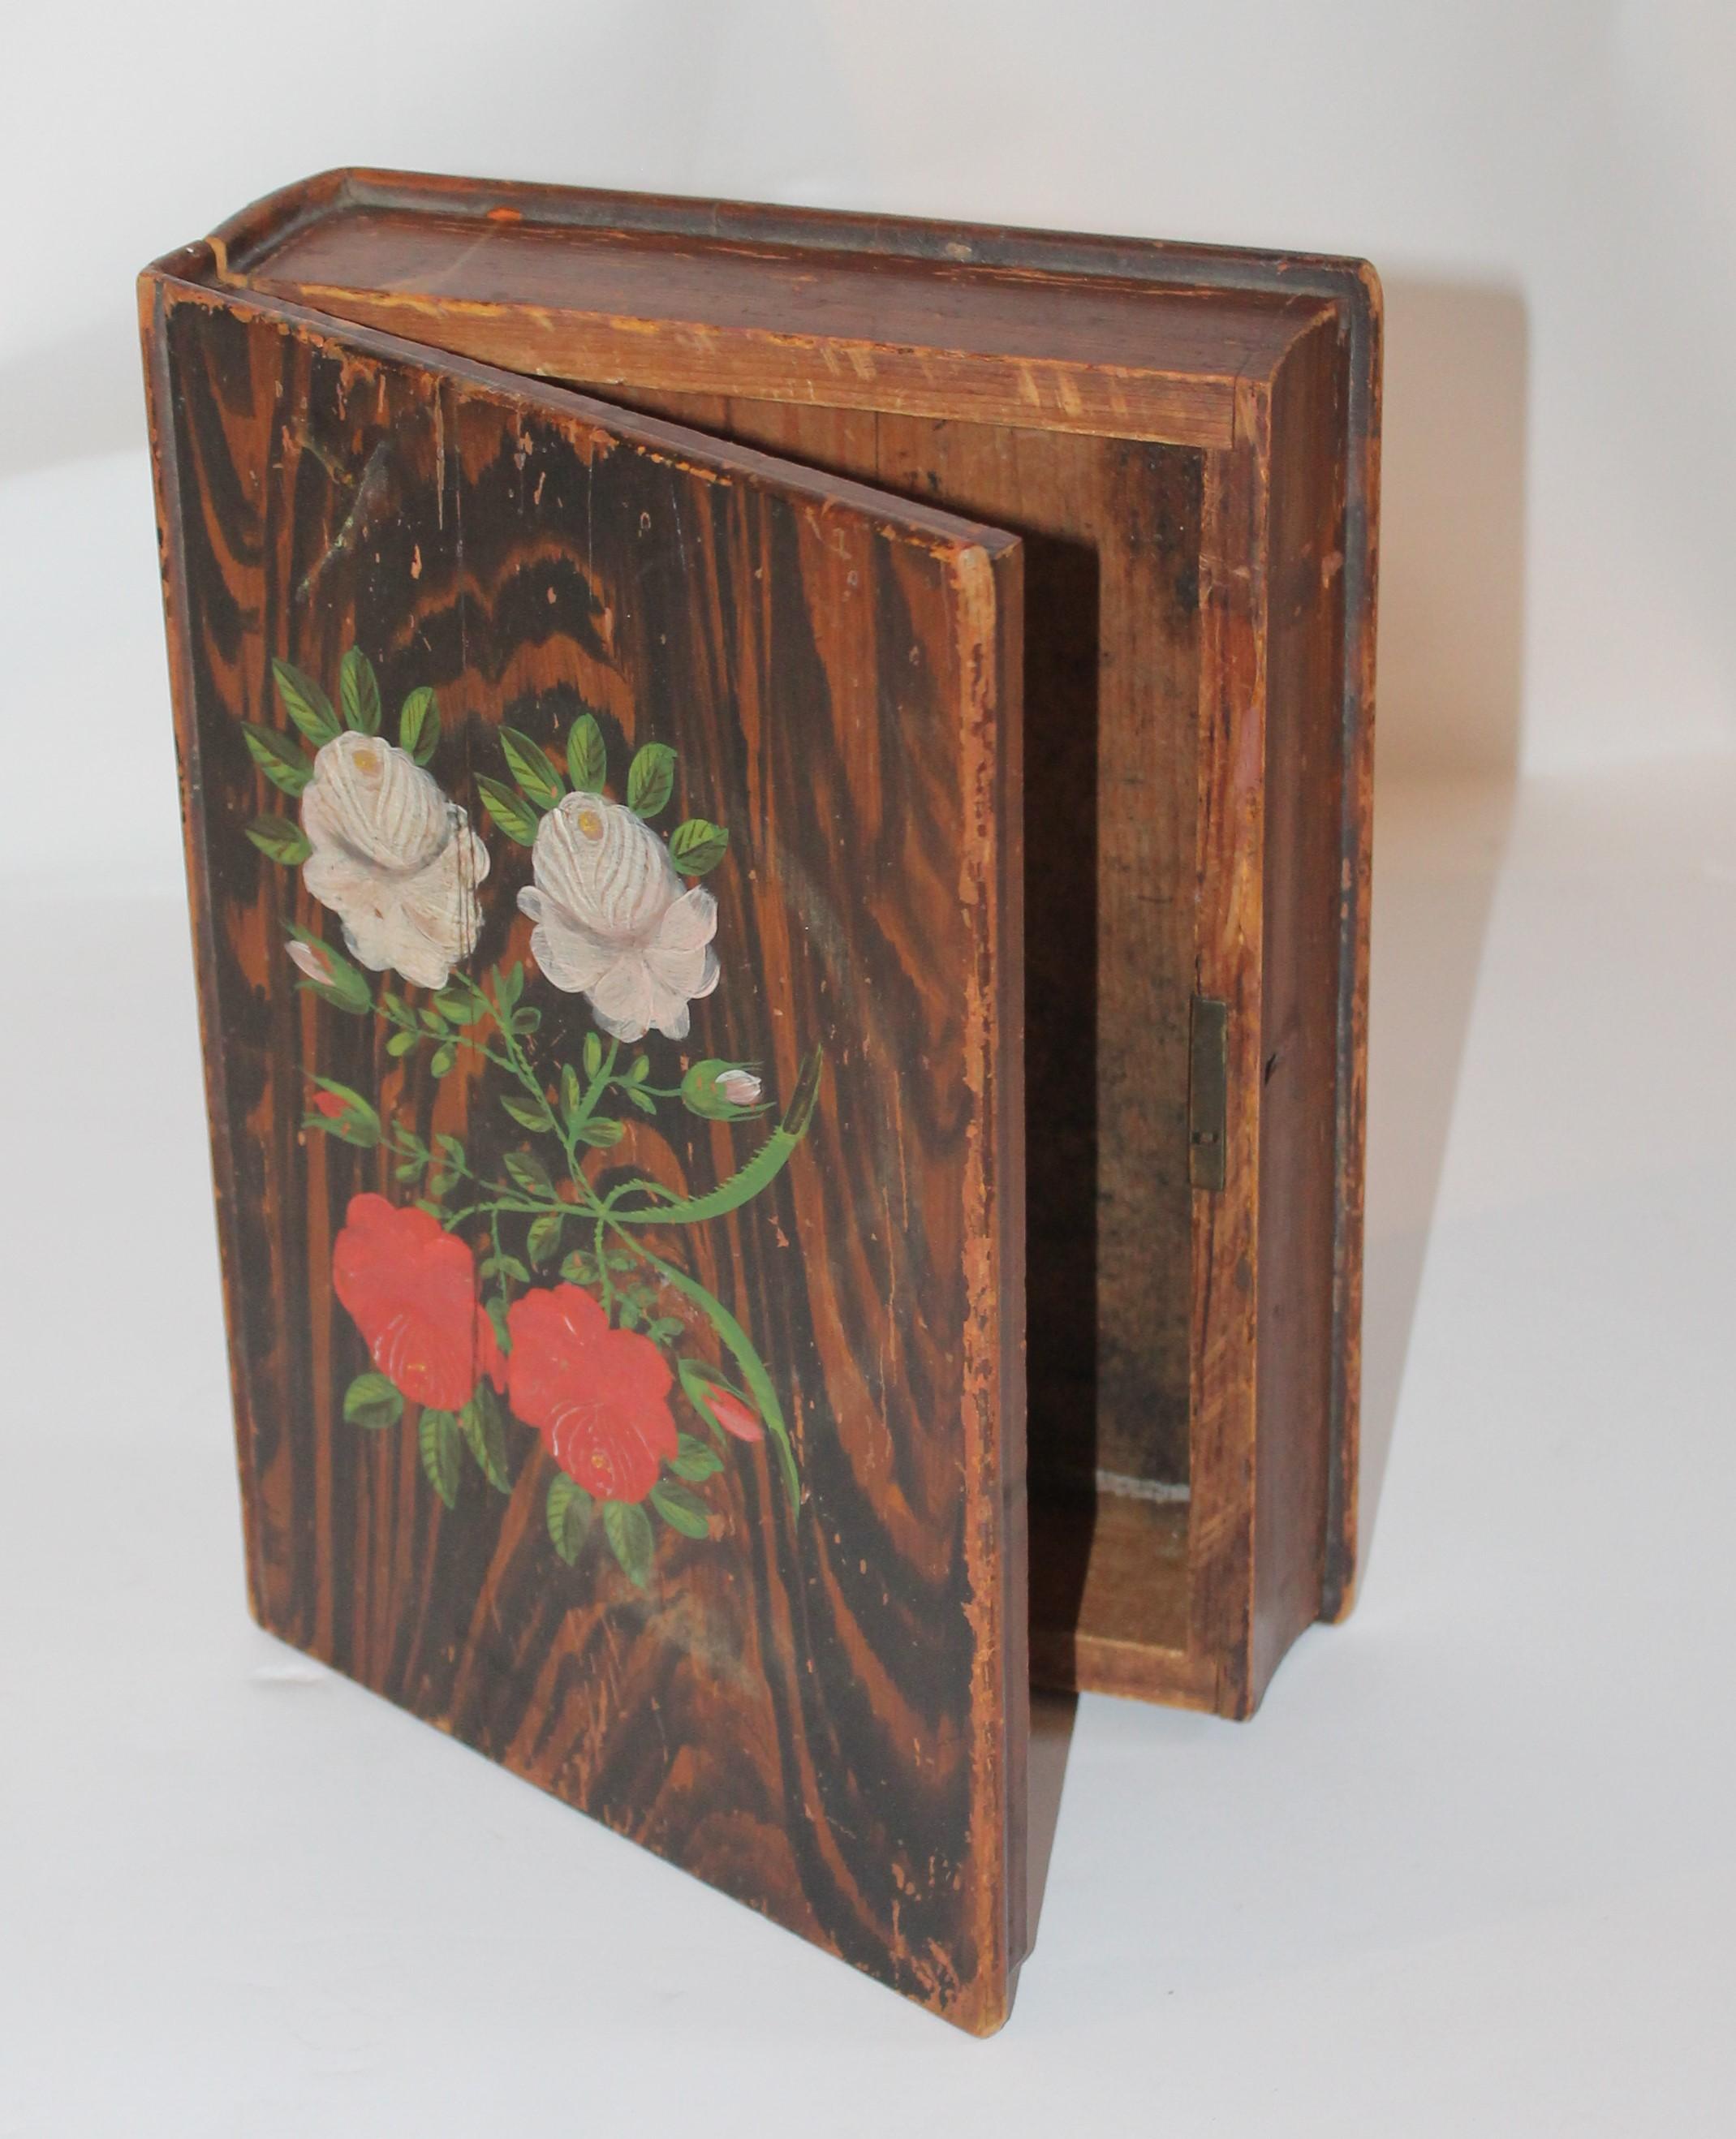 This amazing all original hand-painted and handmade bible box is in fine condition. These most unusual paint decorated boxes are very rare and this in particularly good condition.
    